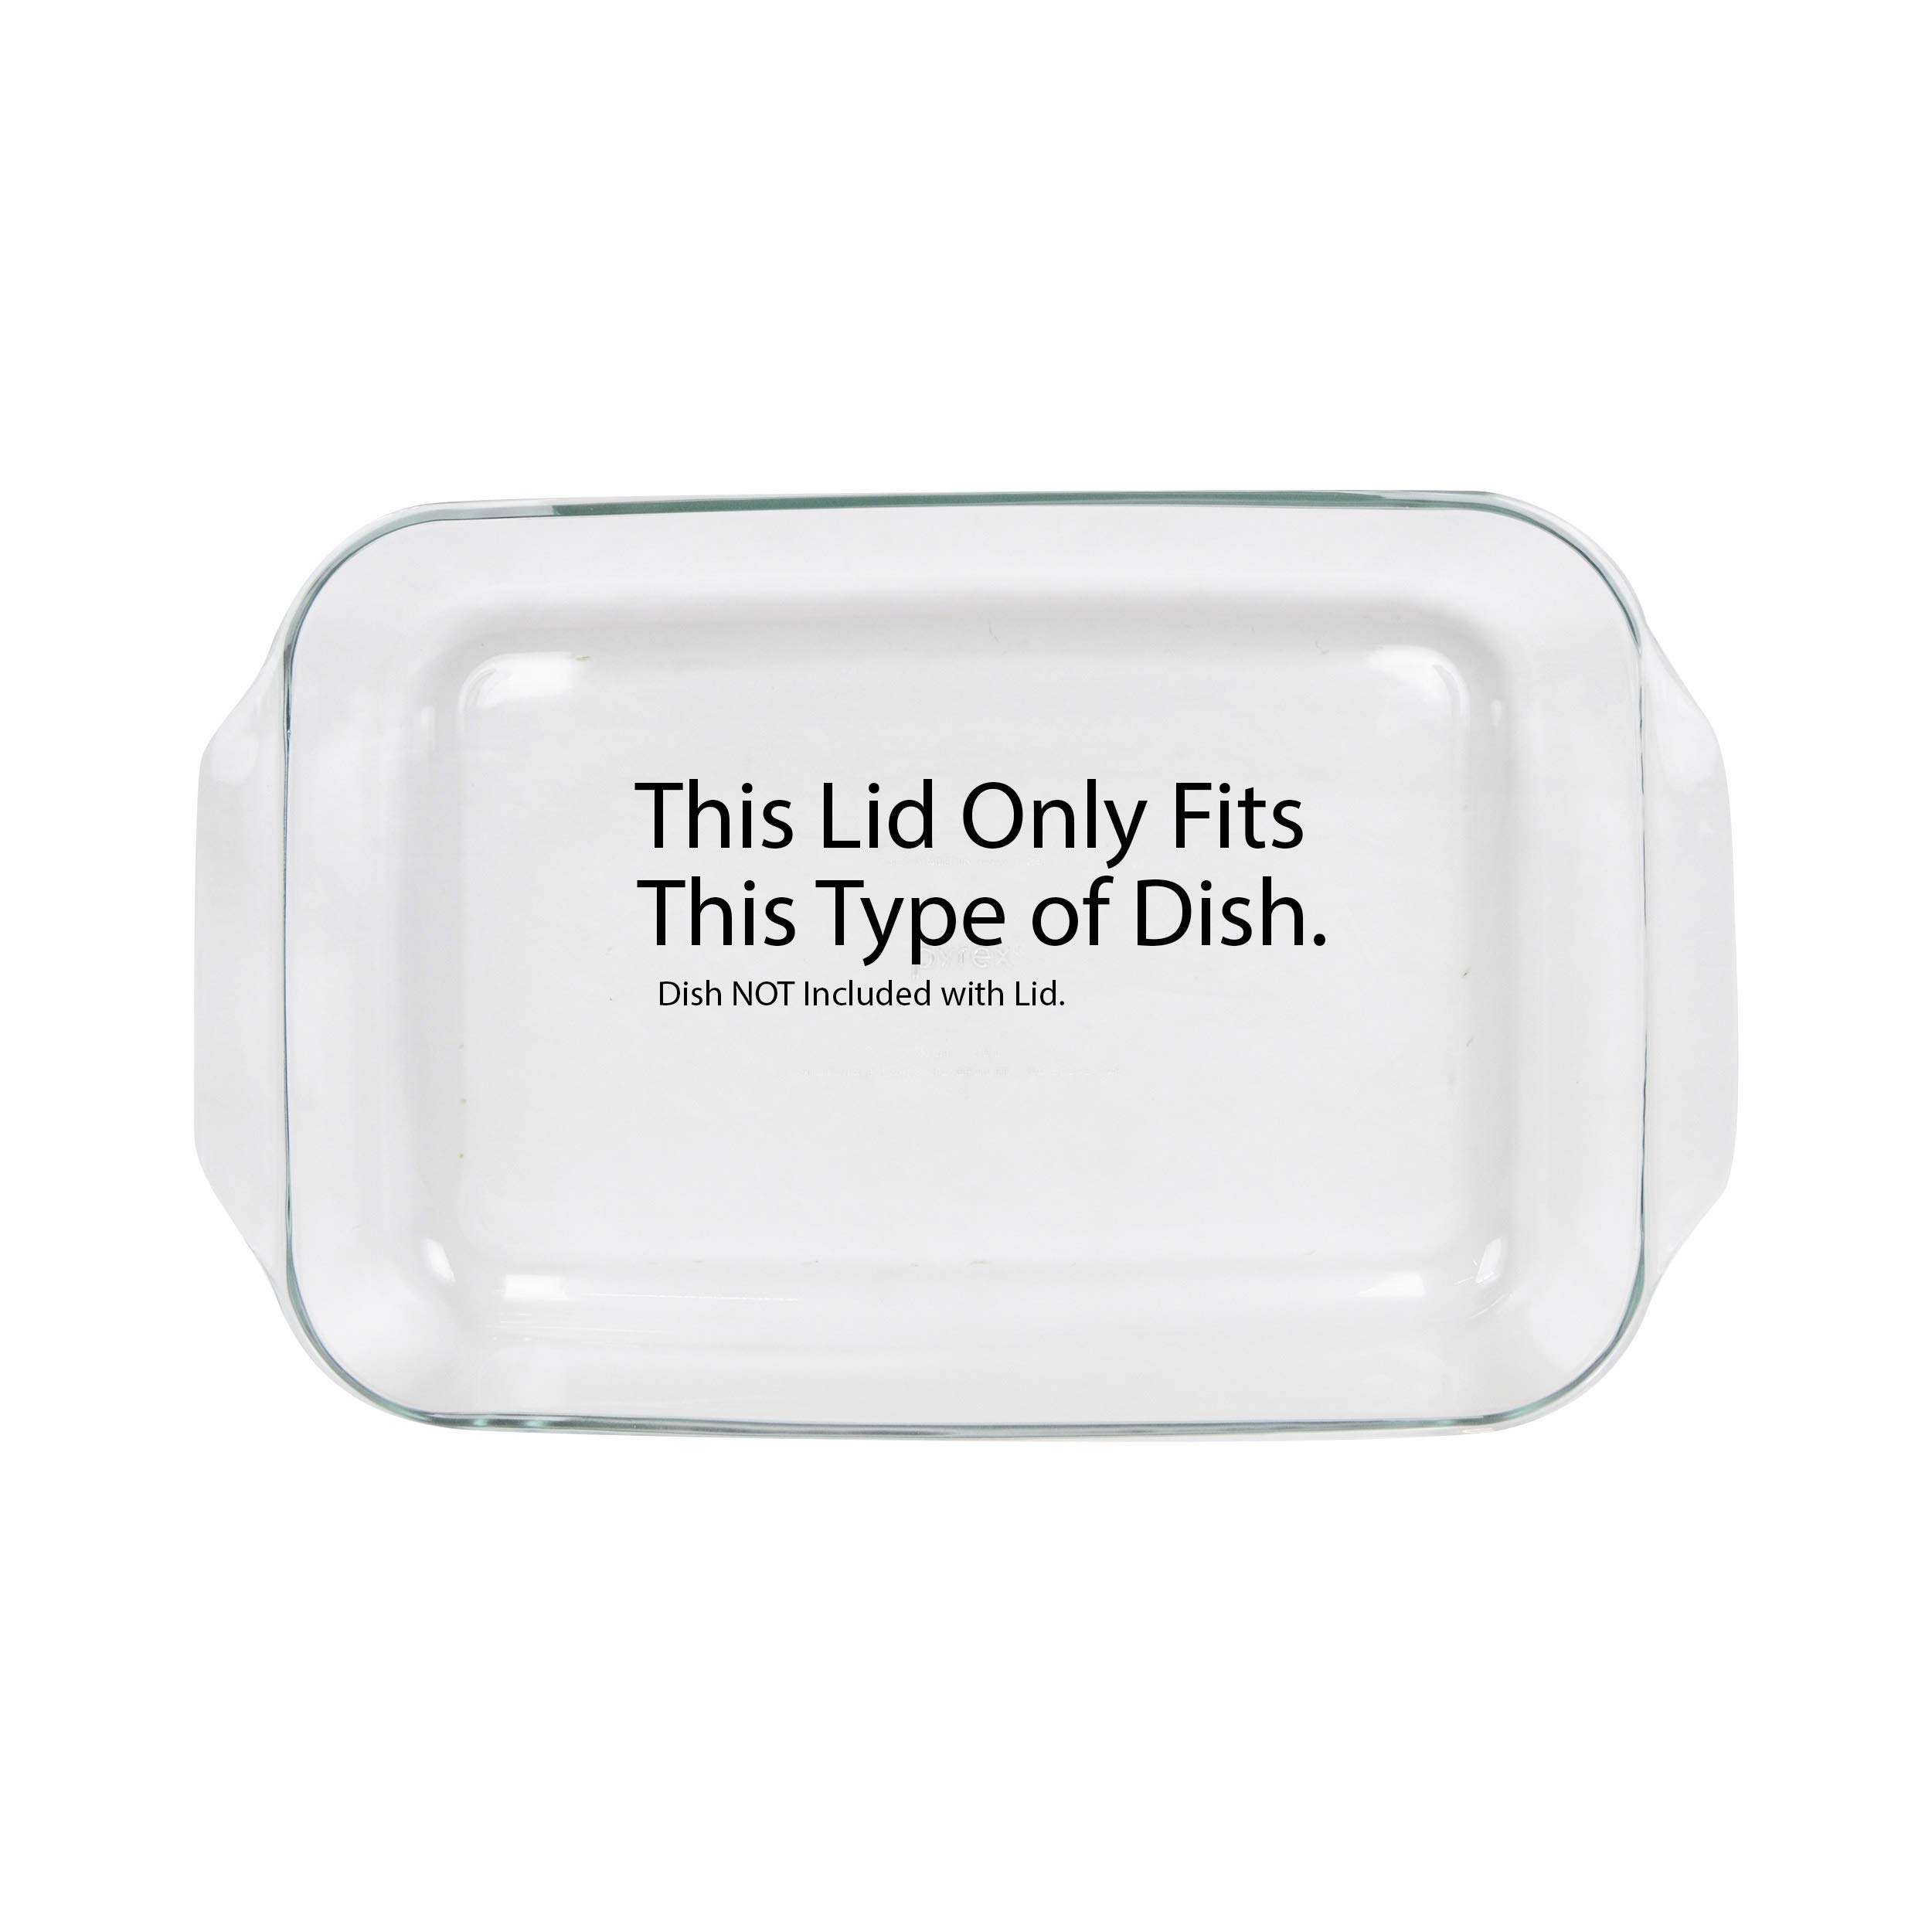 Pyrex 233-PC 3qt Red Replacement Food Storage Lid, (Only Fits Pyrex 233 Glass Dish NOT Pyrex C-233 Dish) Made in the USA